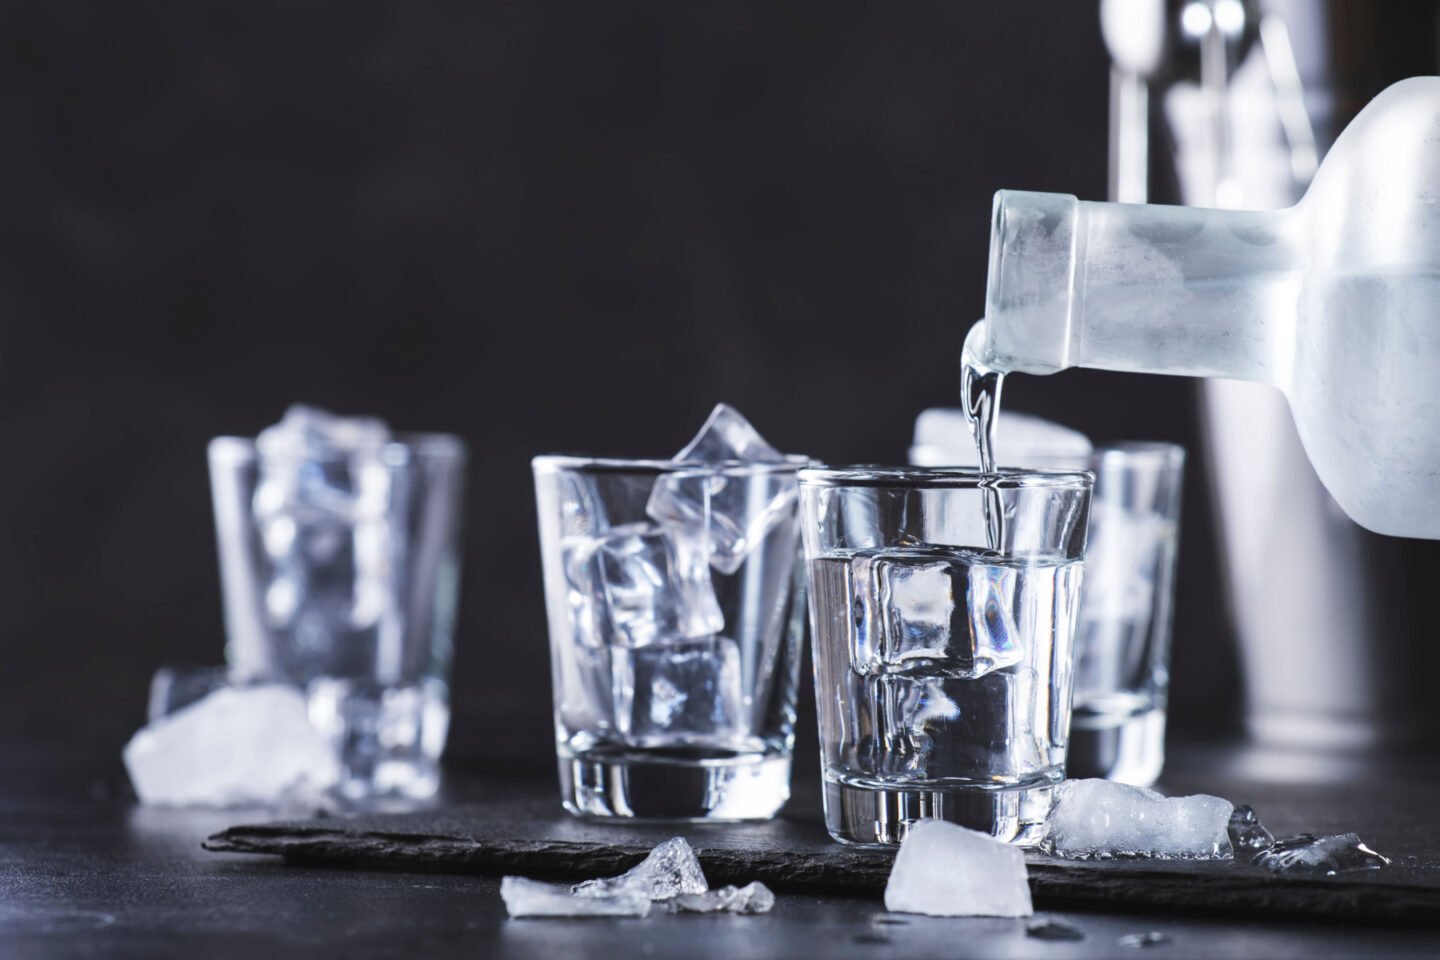 pouring vodka into shot glasses with ice